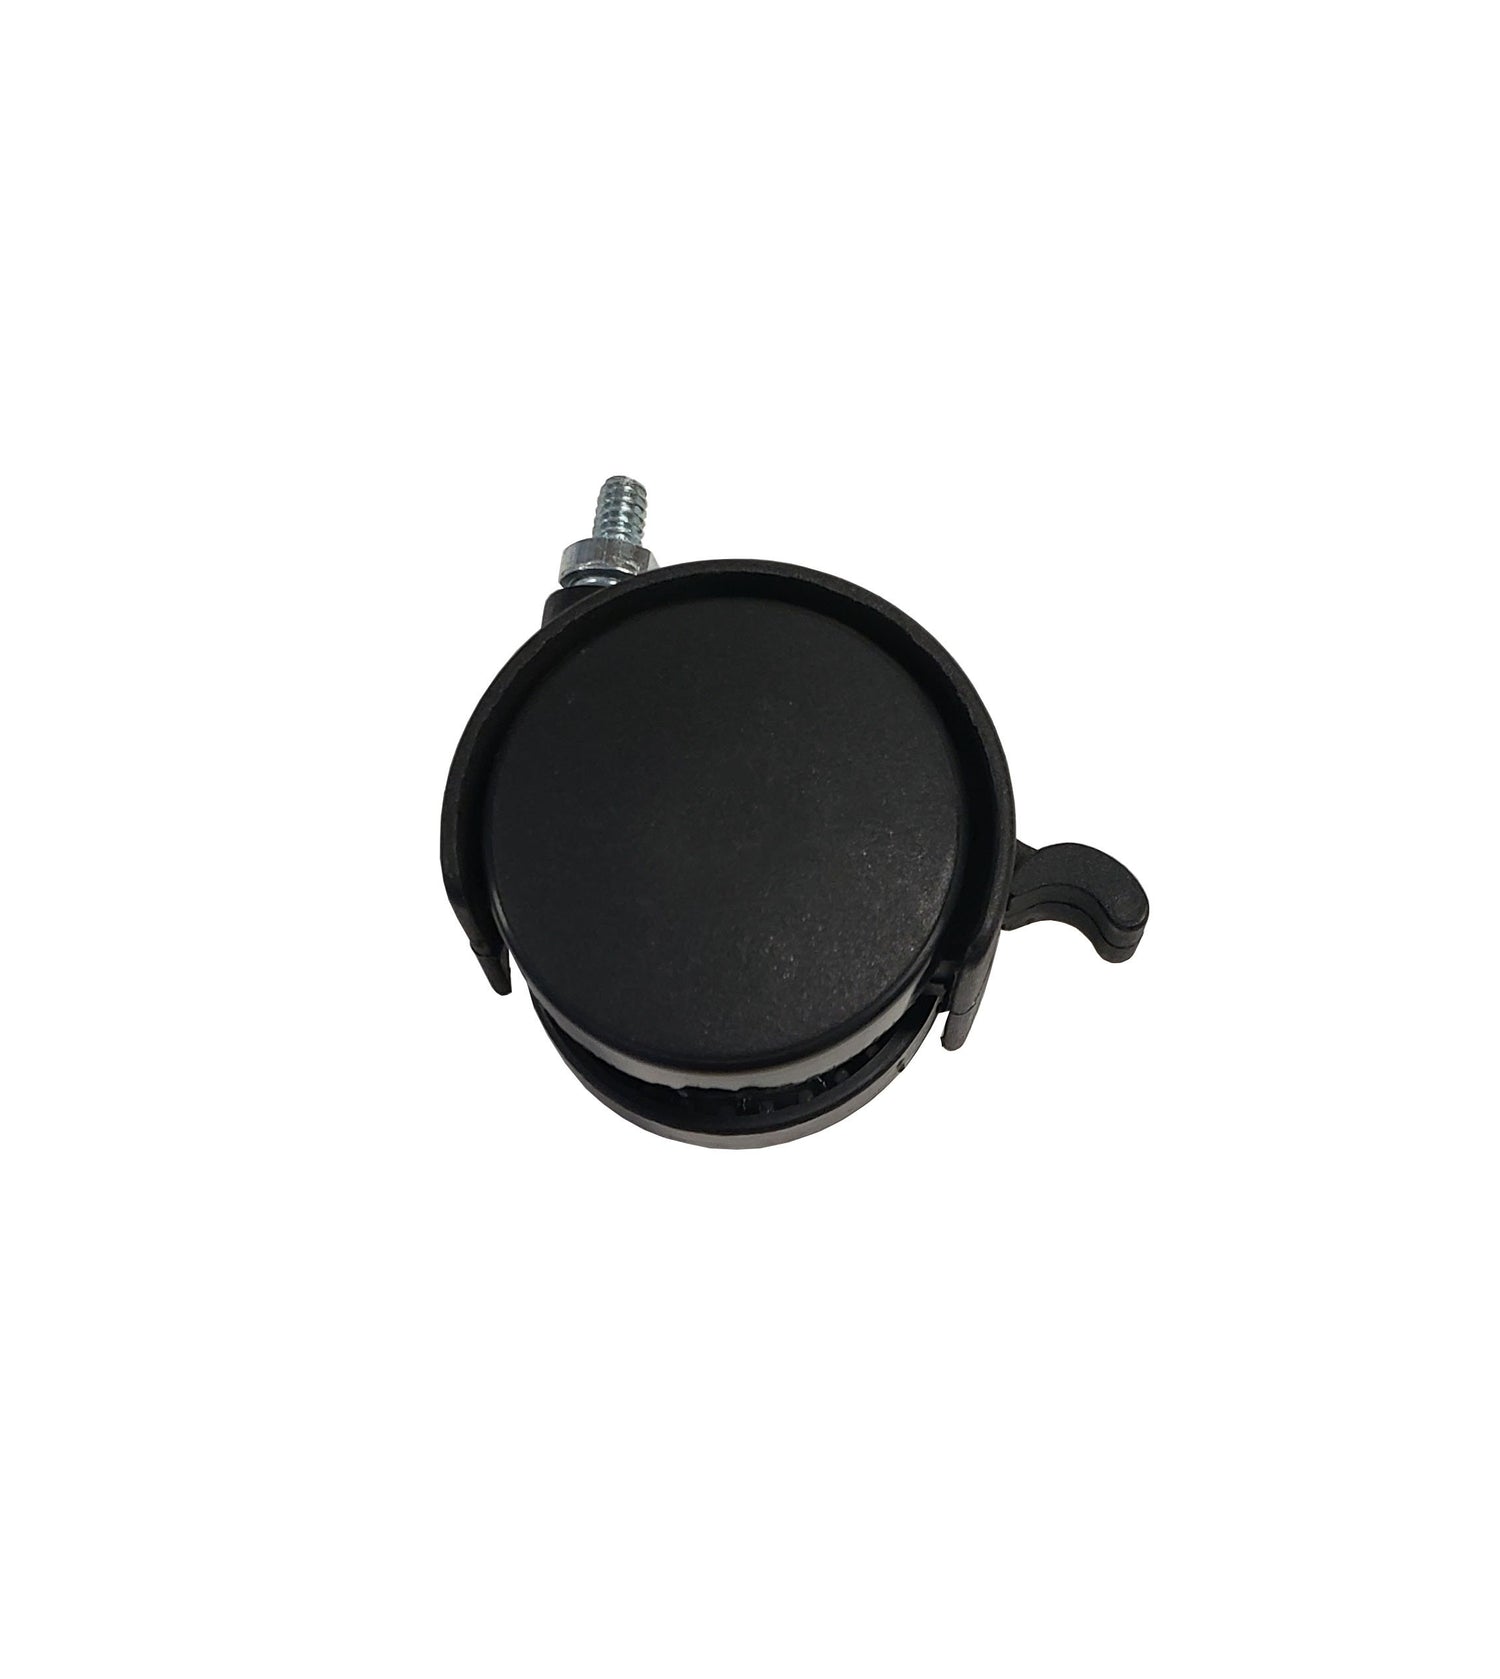 Broil King 1089212 Sterling caster. Having troubles getting your unit to roll around to where you want? Cracked, broken or seized caster? Not a problem. This quick fix will have you rollin’ into the new BBQ season like a brand-new unit. Available to order with Barbecues Galore.